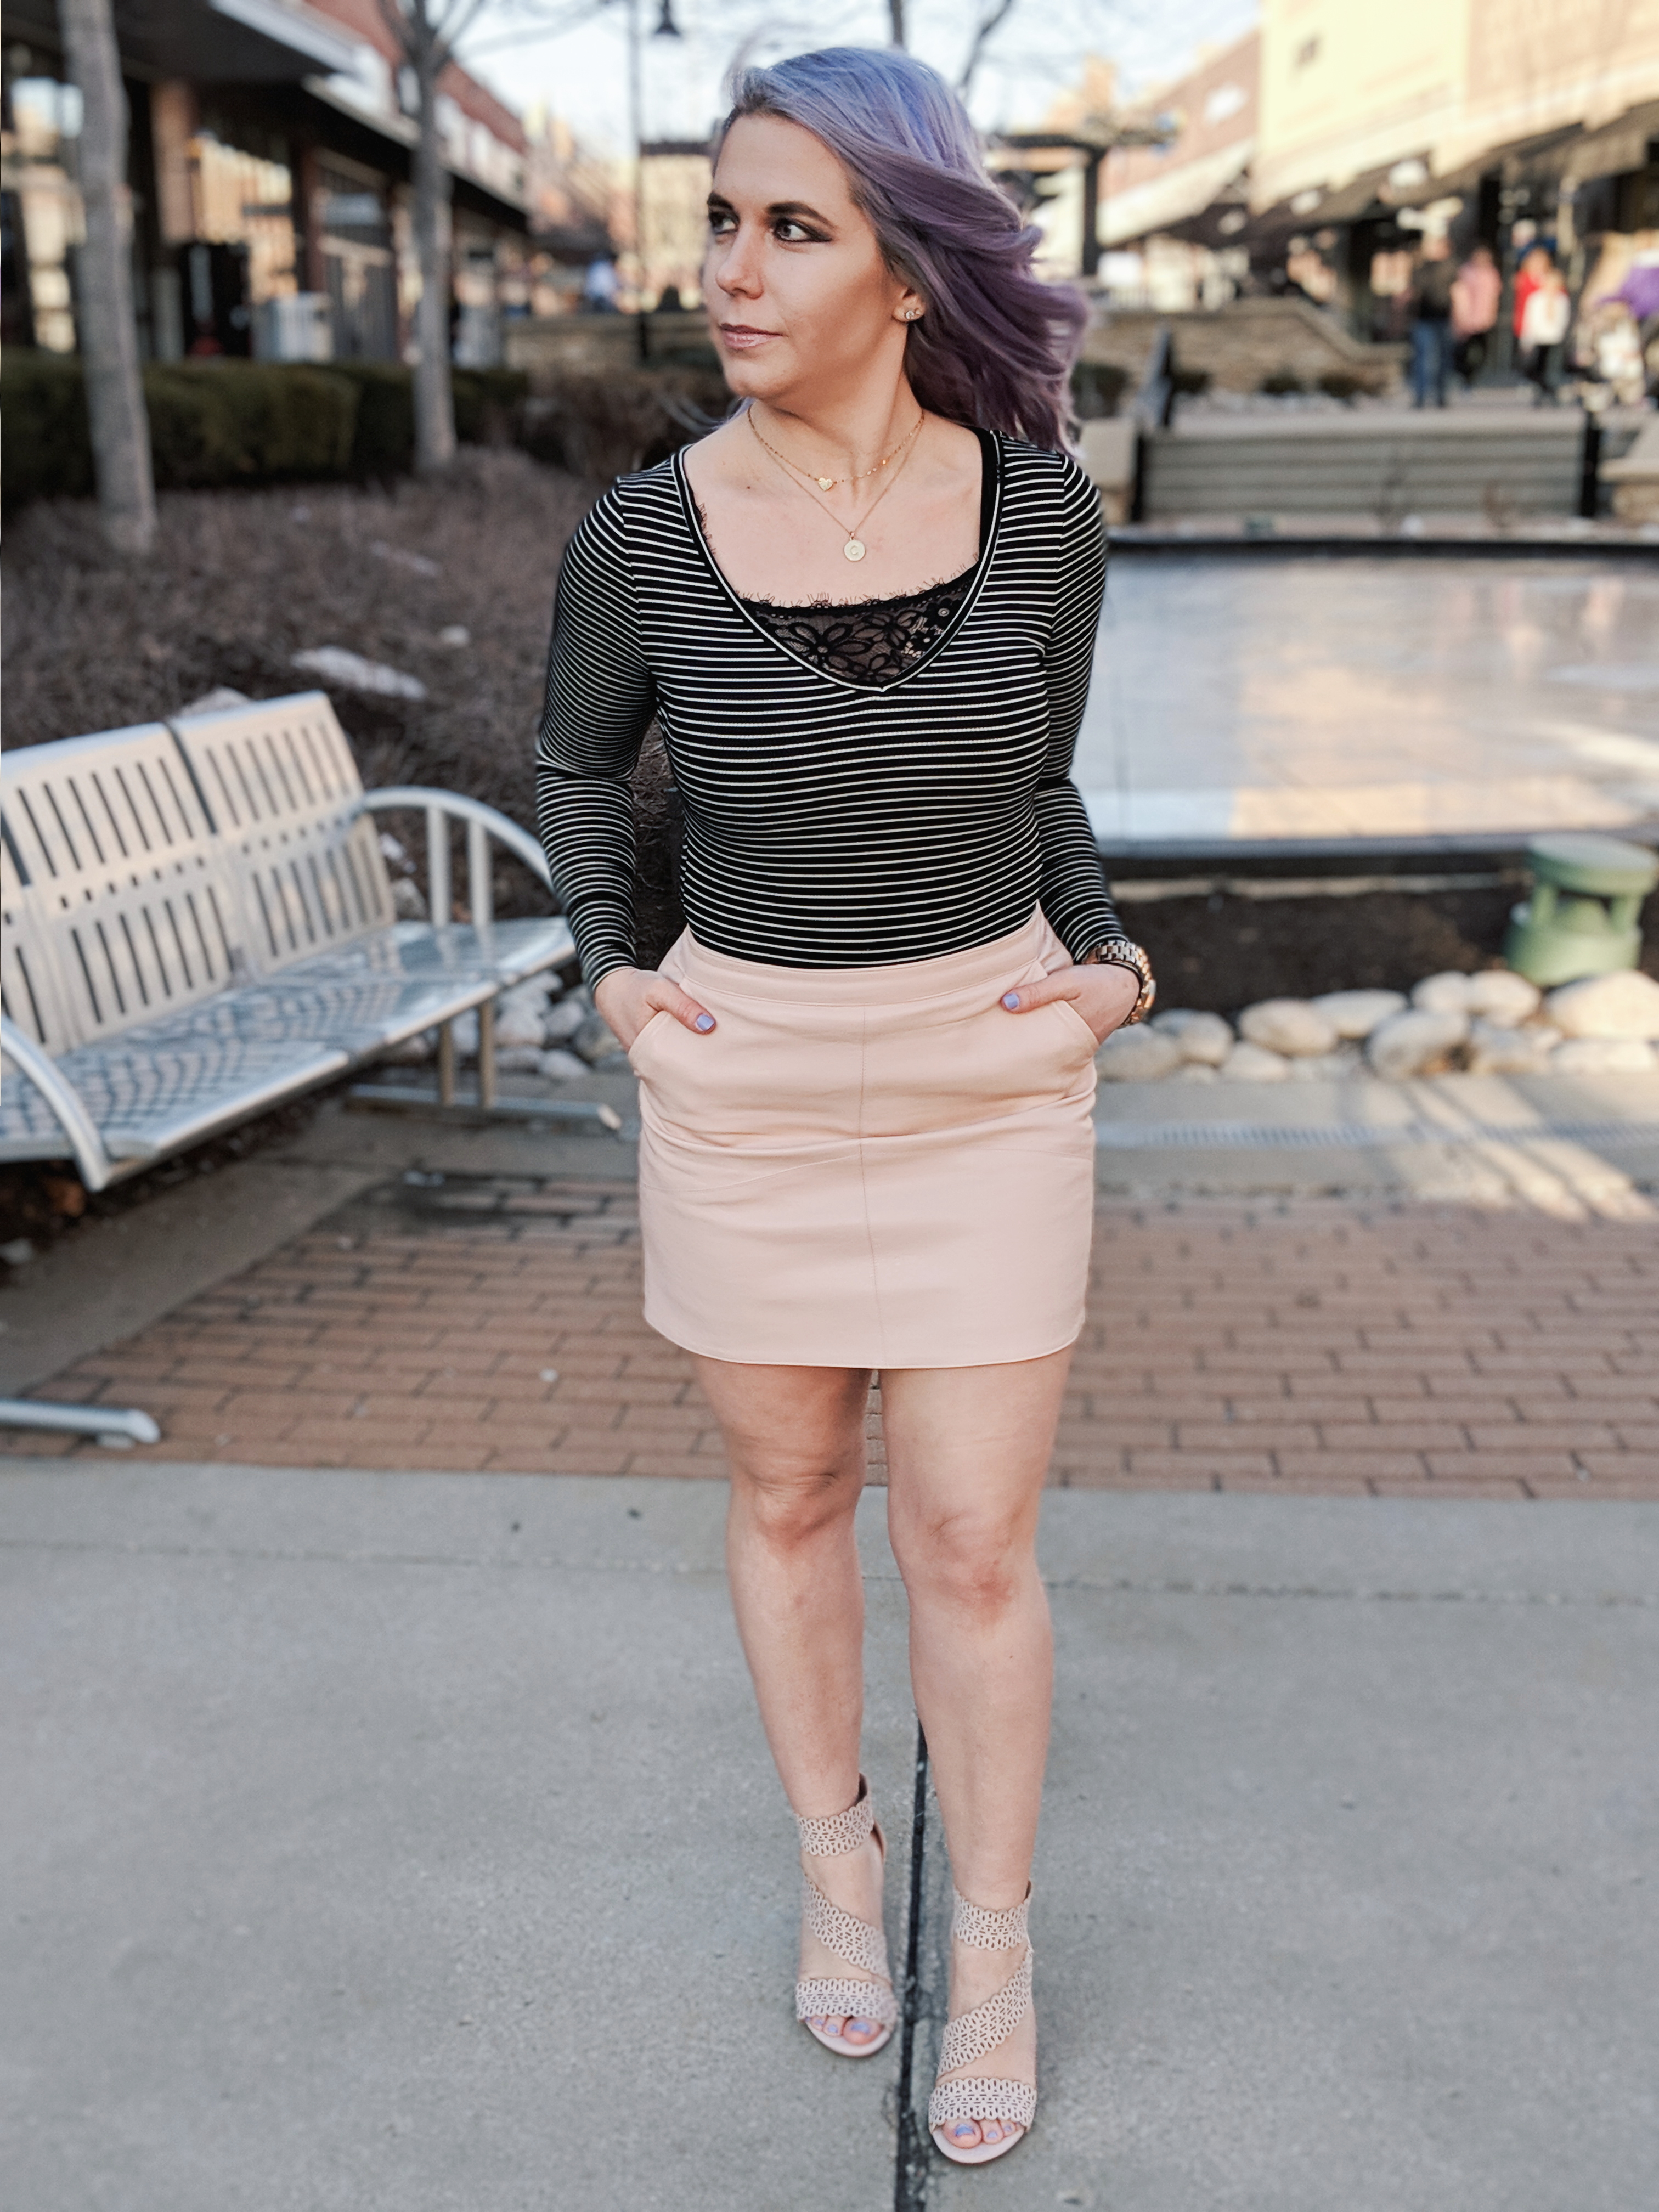 Cute Shoes for Spring 2019 - Where to find the best cute shoes for spring 2019! Kansas City fashion blogger Tricia Nibarger of COVET by tricia showcases the shoe selection at Off Broadway Shoes at Legends Outlets in Kansas City. (ad) Strappy nude sandals are paired with a pink leather mini skirt, black bodysuit, and cute bralette. #obshoes #fashion #style #fashionista #styleinspo